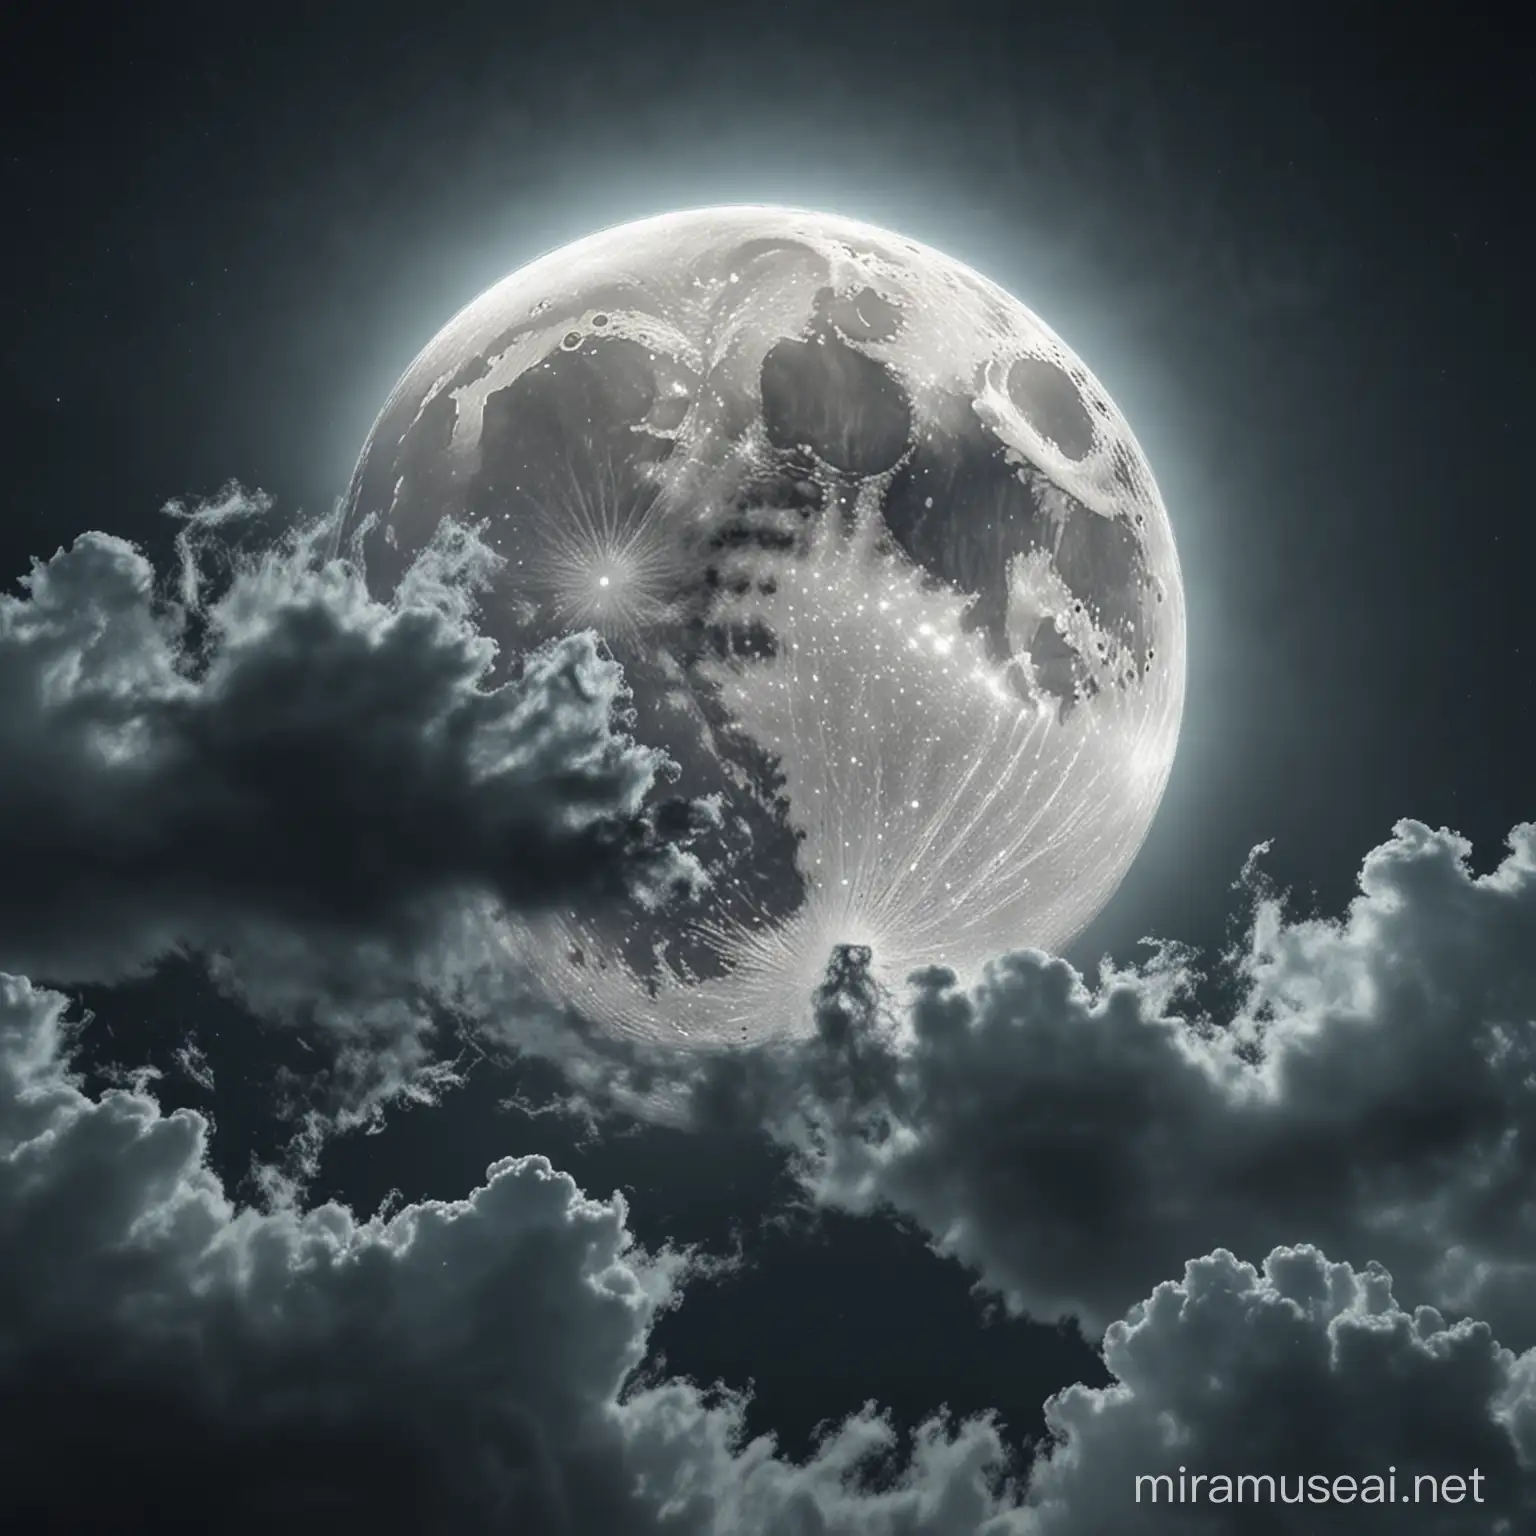 Enchanting Night Sky with Majestic Full Moon Hyper Realistic 35mm